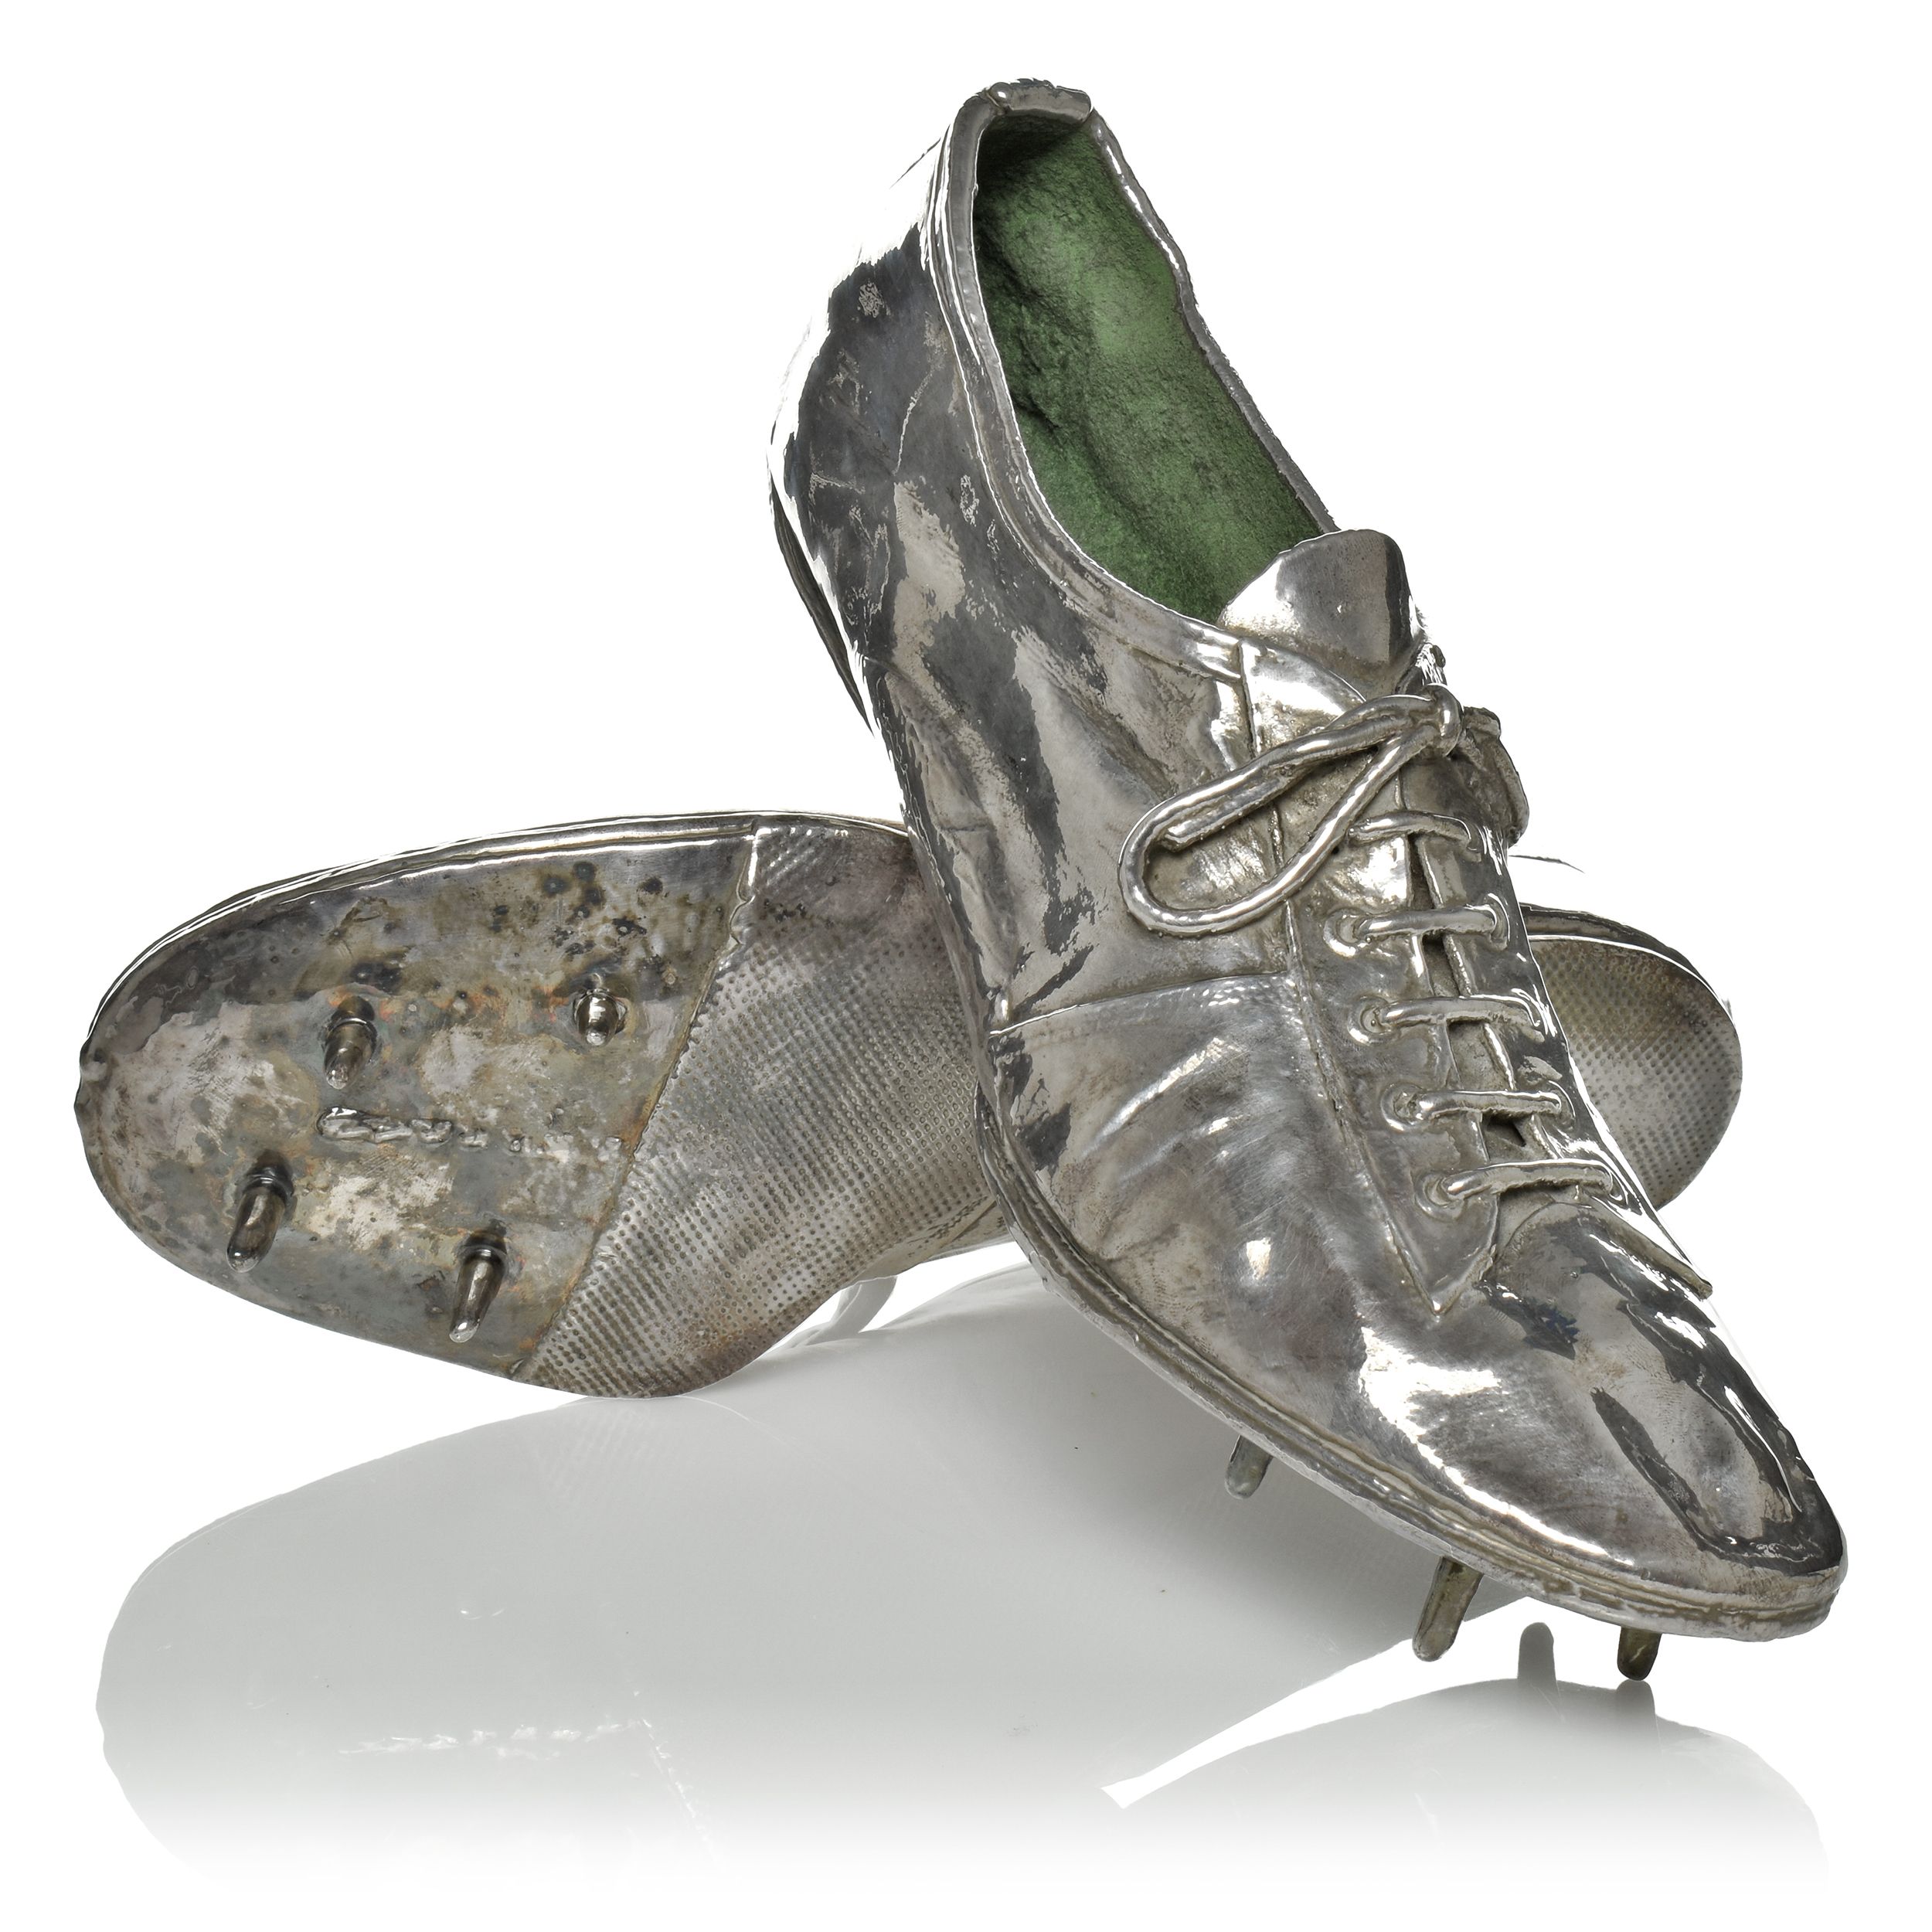 Diane Leather's silvered sub-five-minute mile spikes